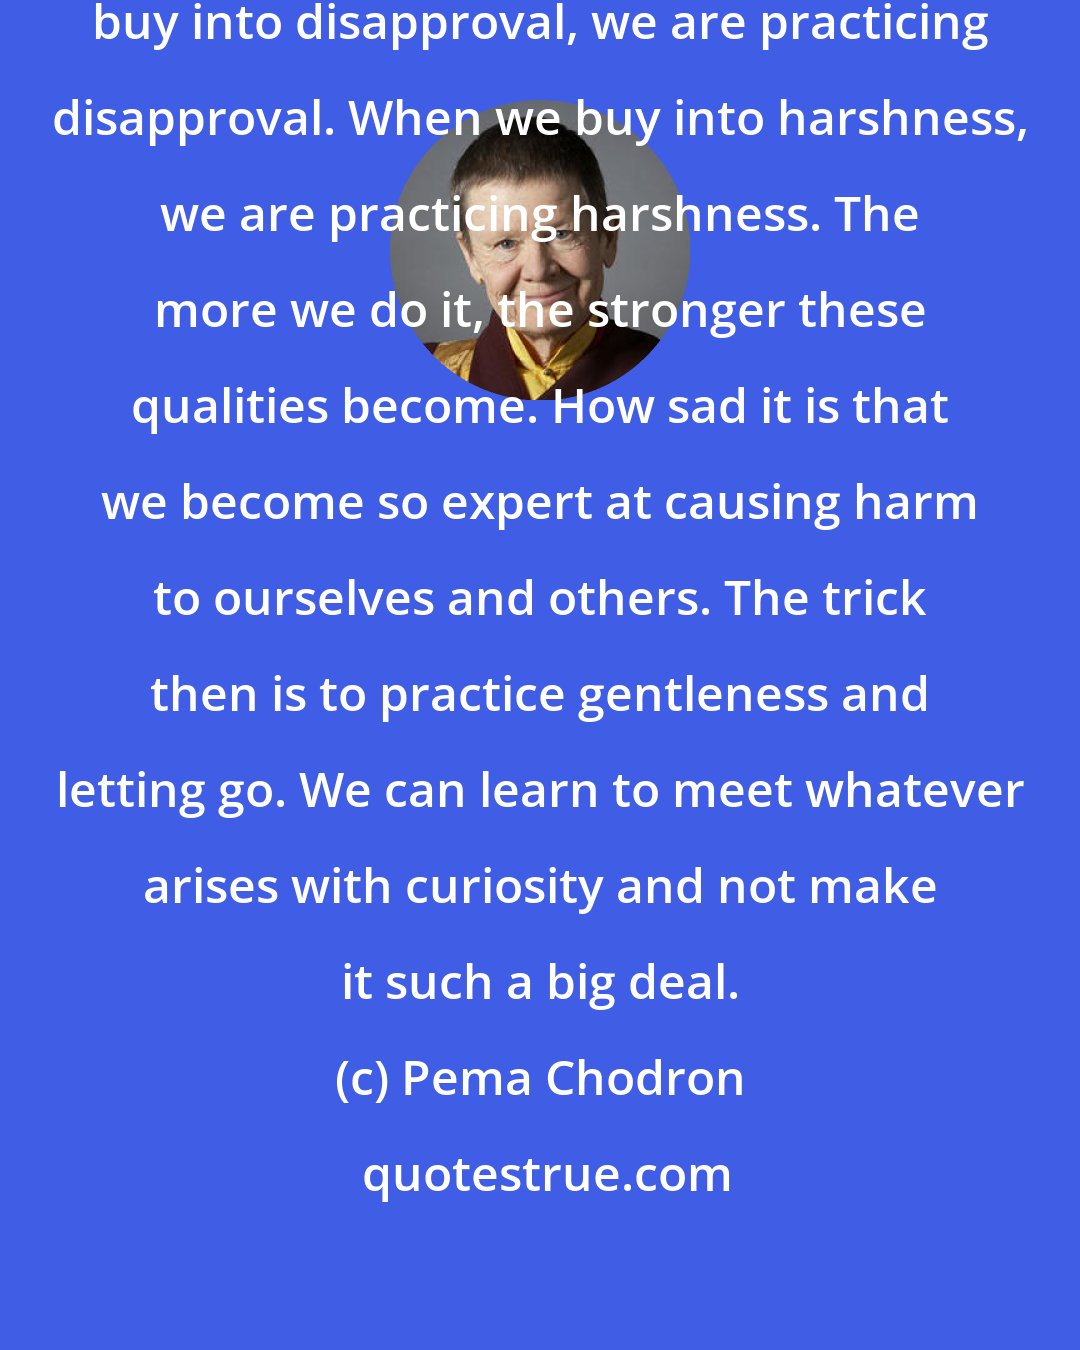 Pema Chodron: The painful thing is that when we buy into disapproval, we are practicing disapproval. When we buy into harshness, we are practicing harshness. The more we do it, the stronger these qualities become. How sad it is that we become so expert at causing harm to ourselves and others. The trick then is to practice gentleness and letting go. We can learn to meet whatever arises with curiosity and not make it such a big deal.